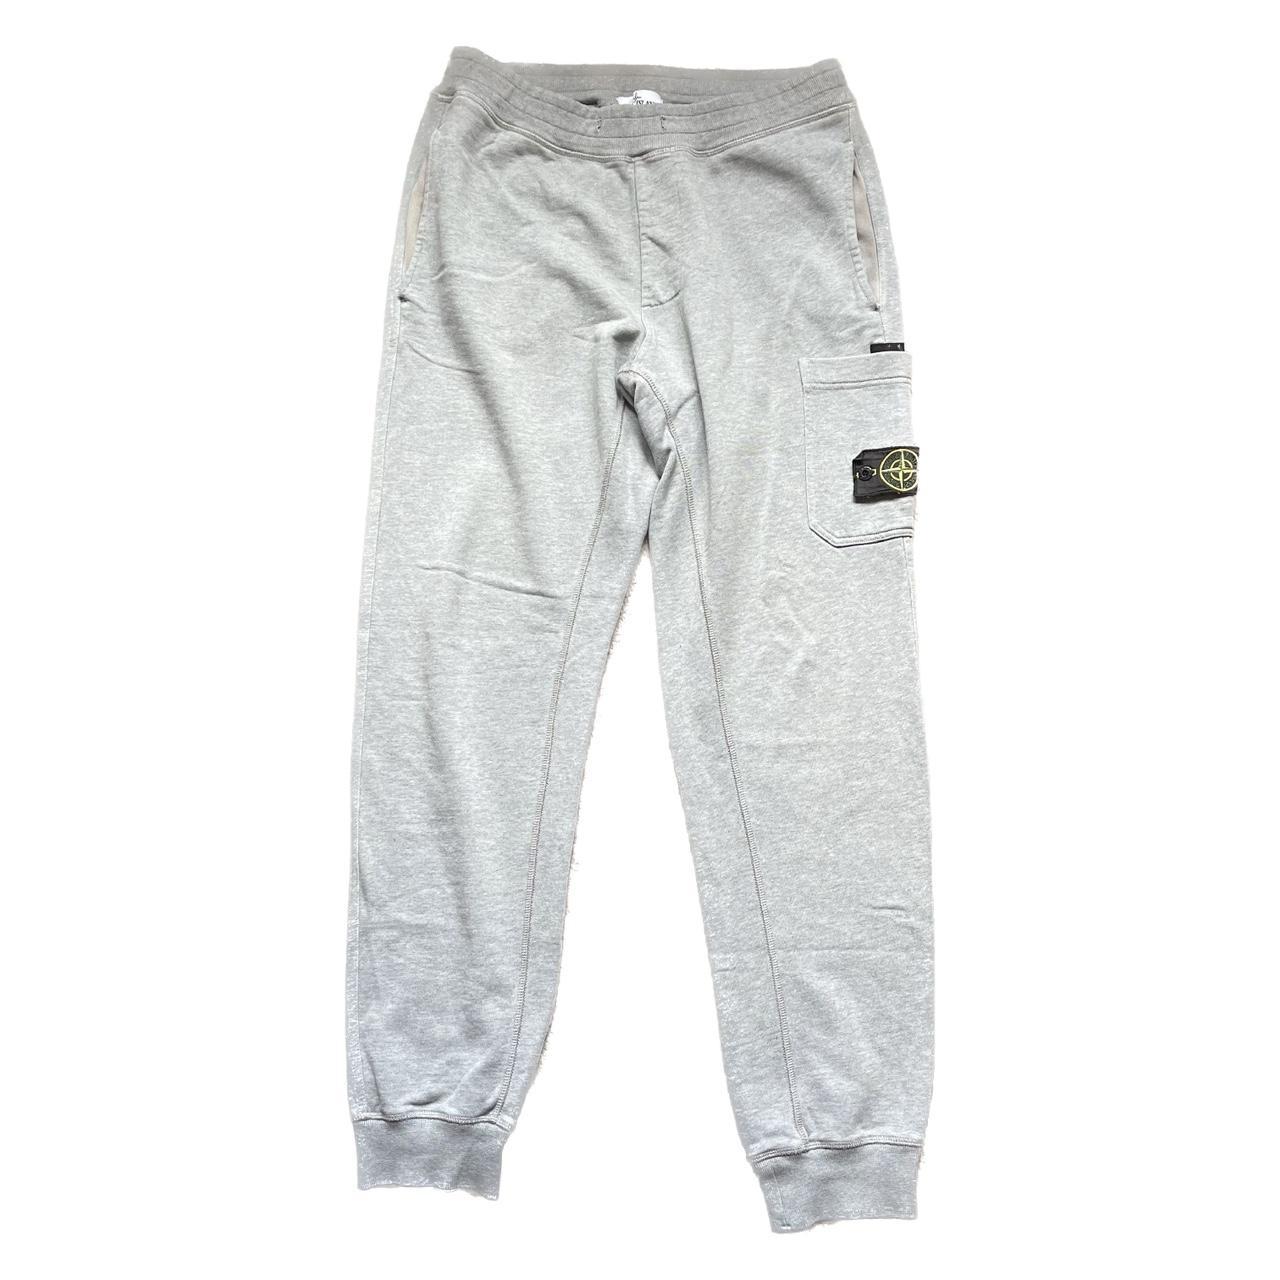 Stone Island Men's Grey and Black Joggers-tracksuits | Depop